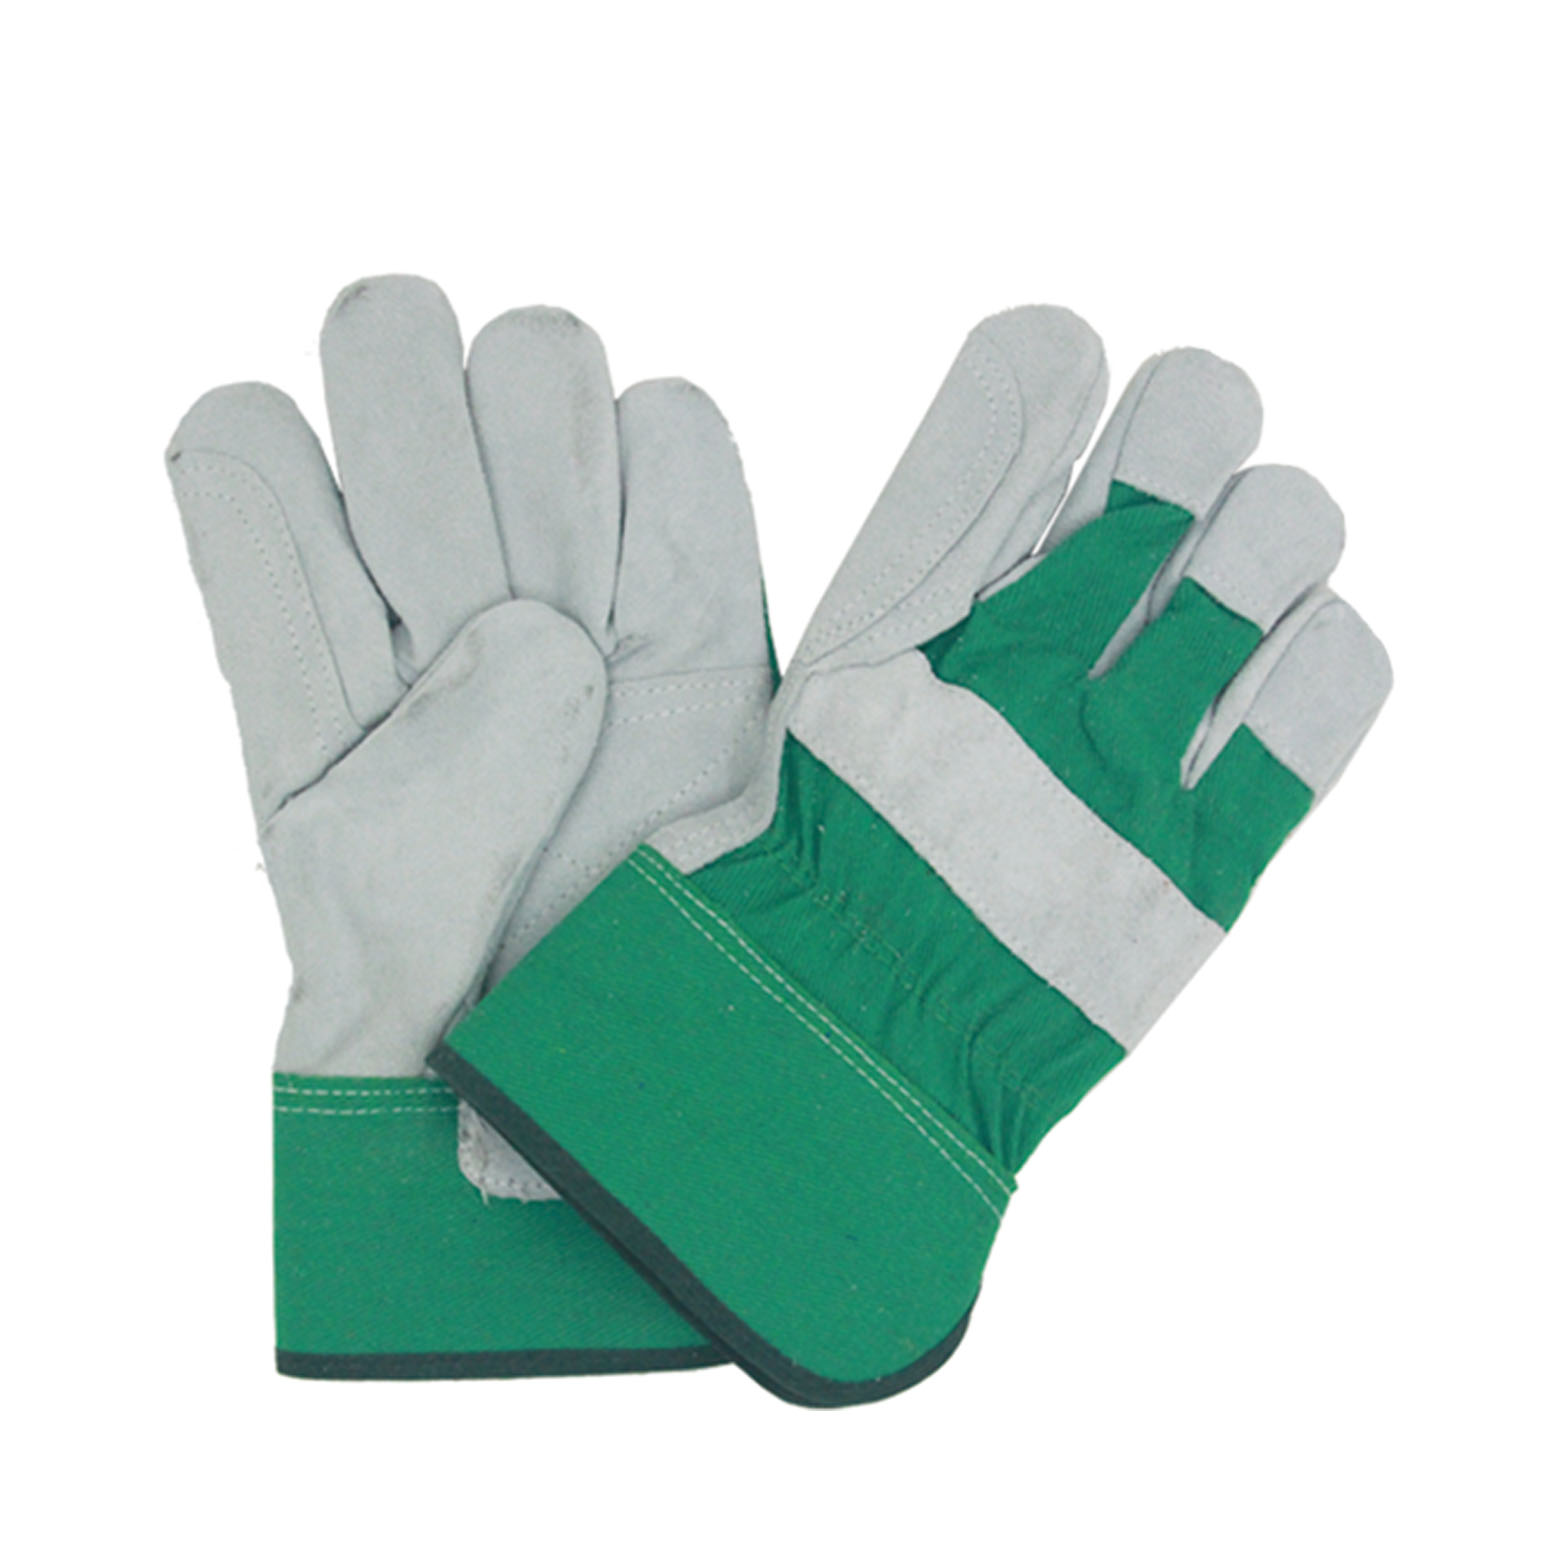 Get Star Weld Green leather safety gloves